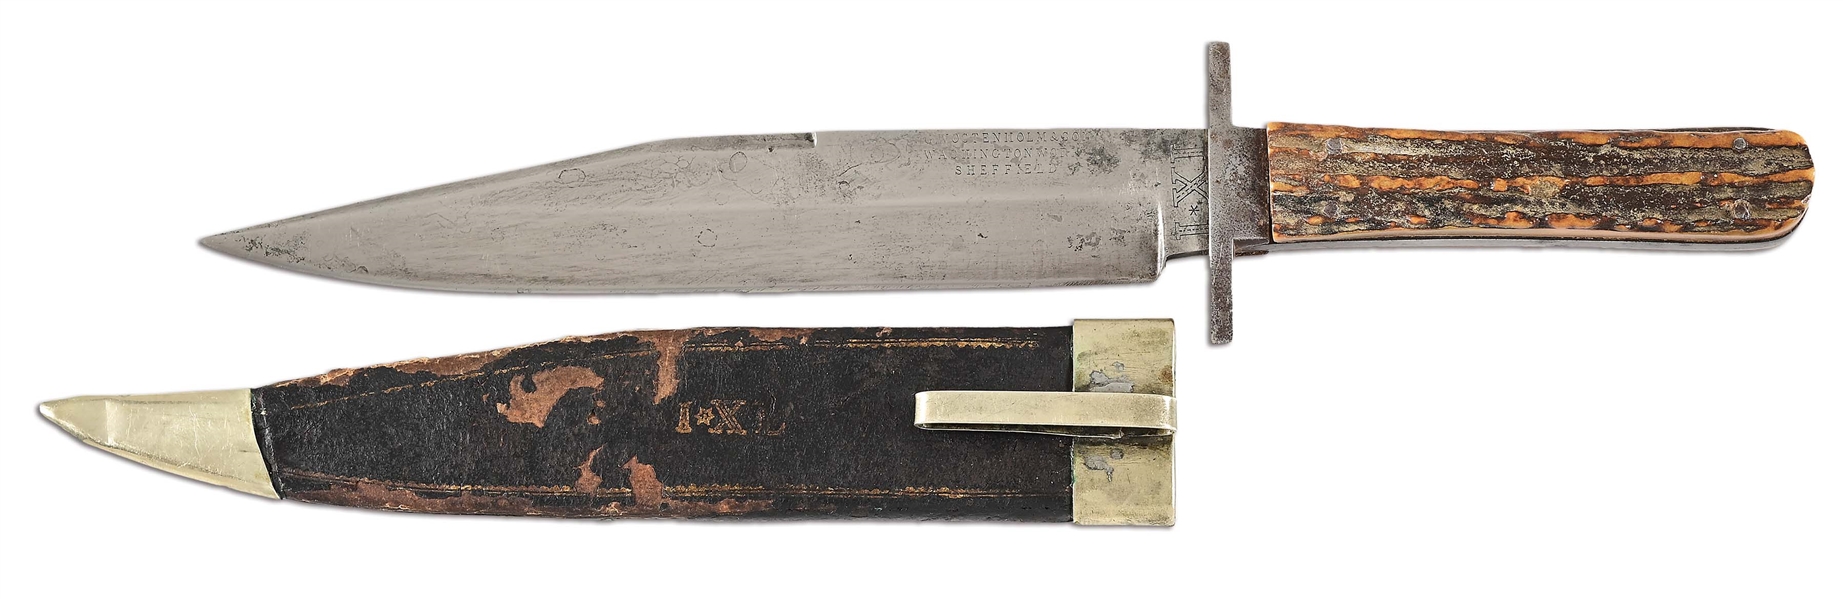 CLIP POINT BOWIE KNIFE WITH UNUSUAL IRON GUARD BY GEO. WOSTENHOLM, SHEFFIELD.